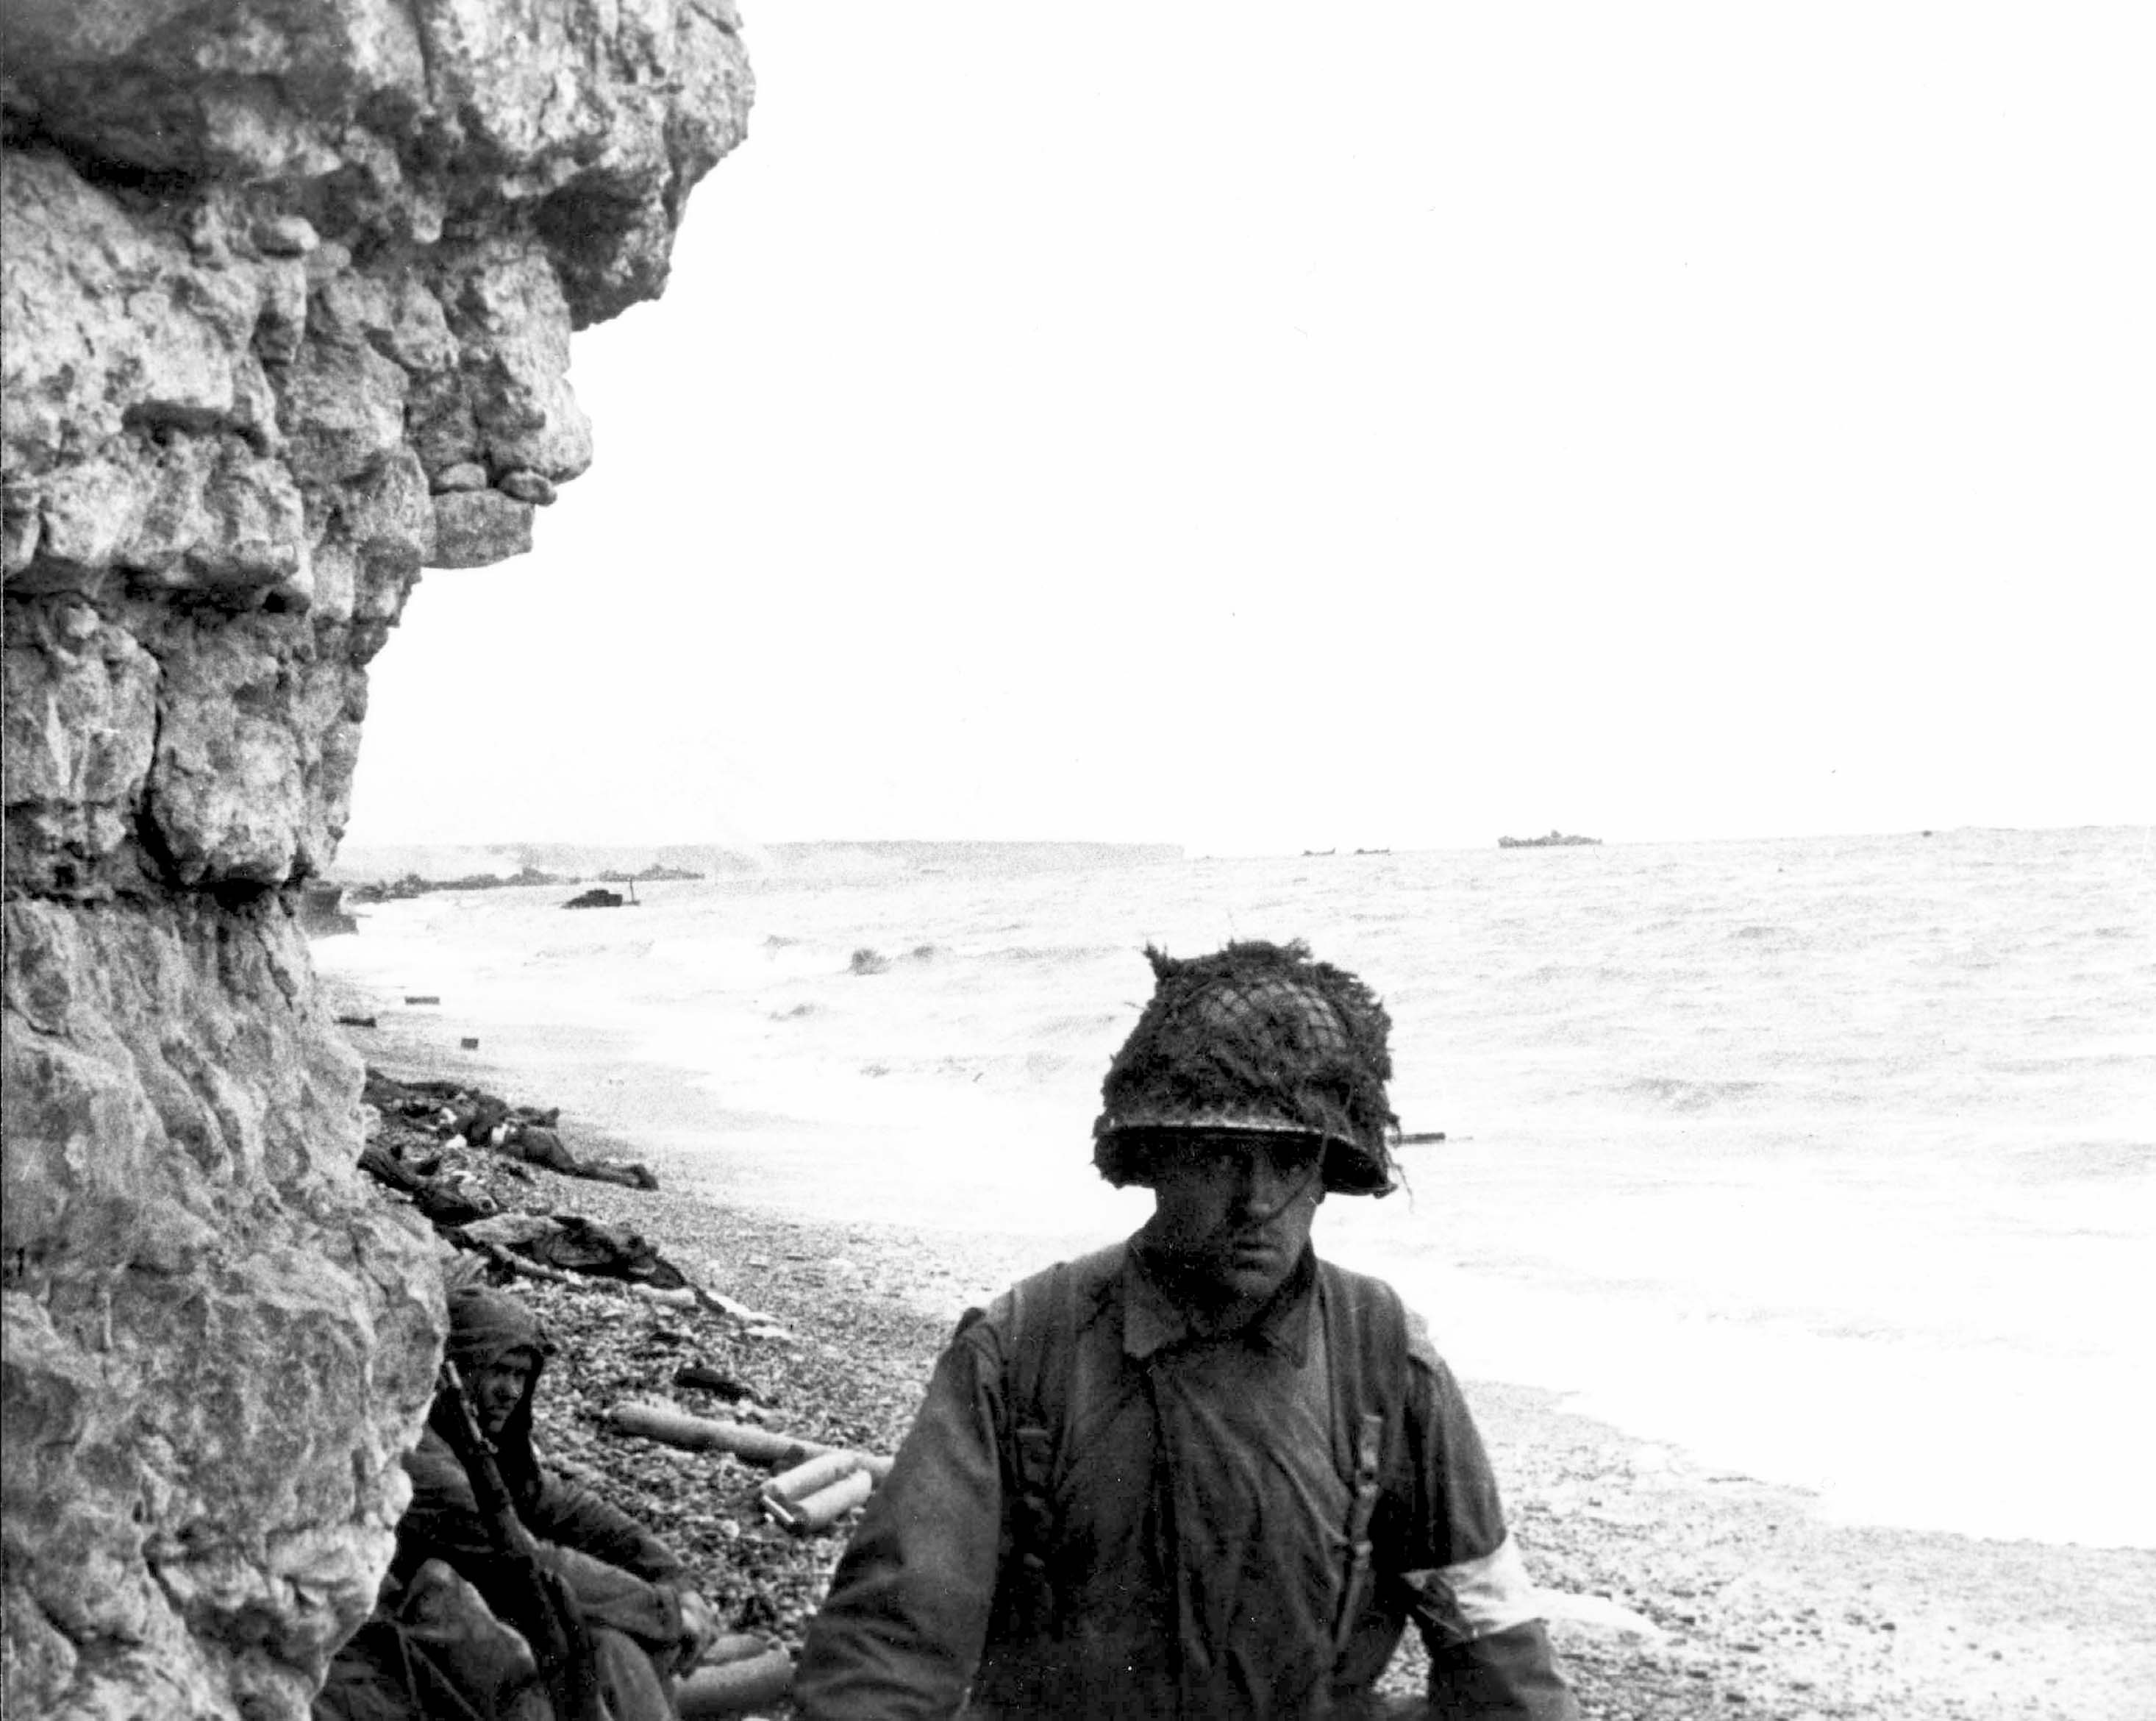 A U.S. Army medic moves along a narrow strip of Omaha Beach administering first aid to men wounded in the Normandy landing on D-Day